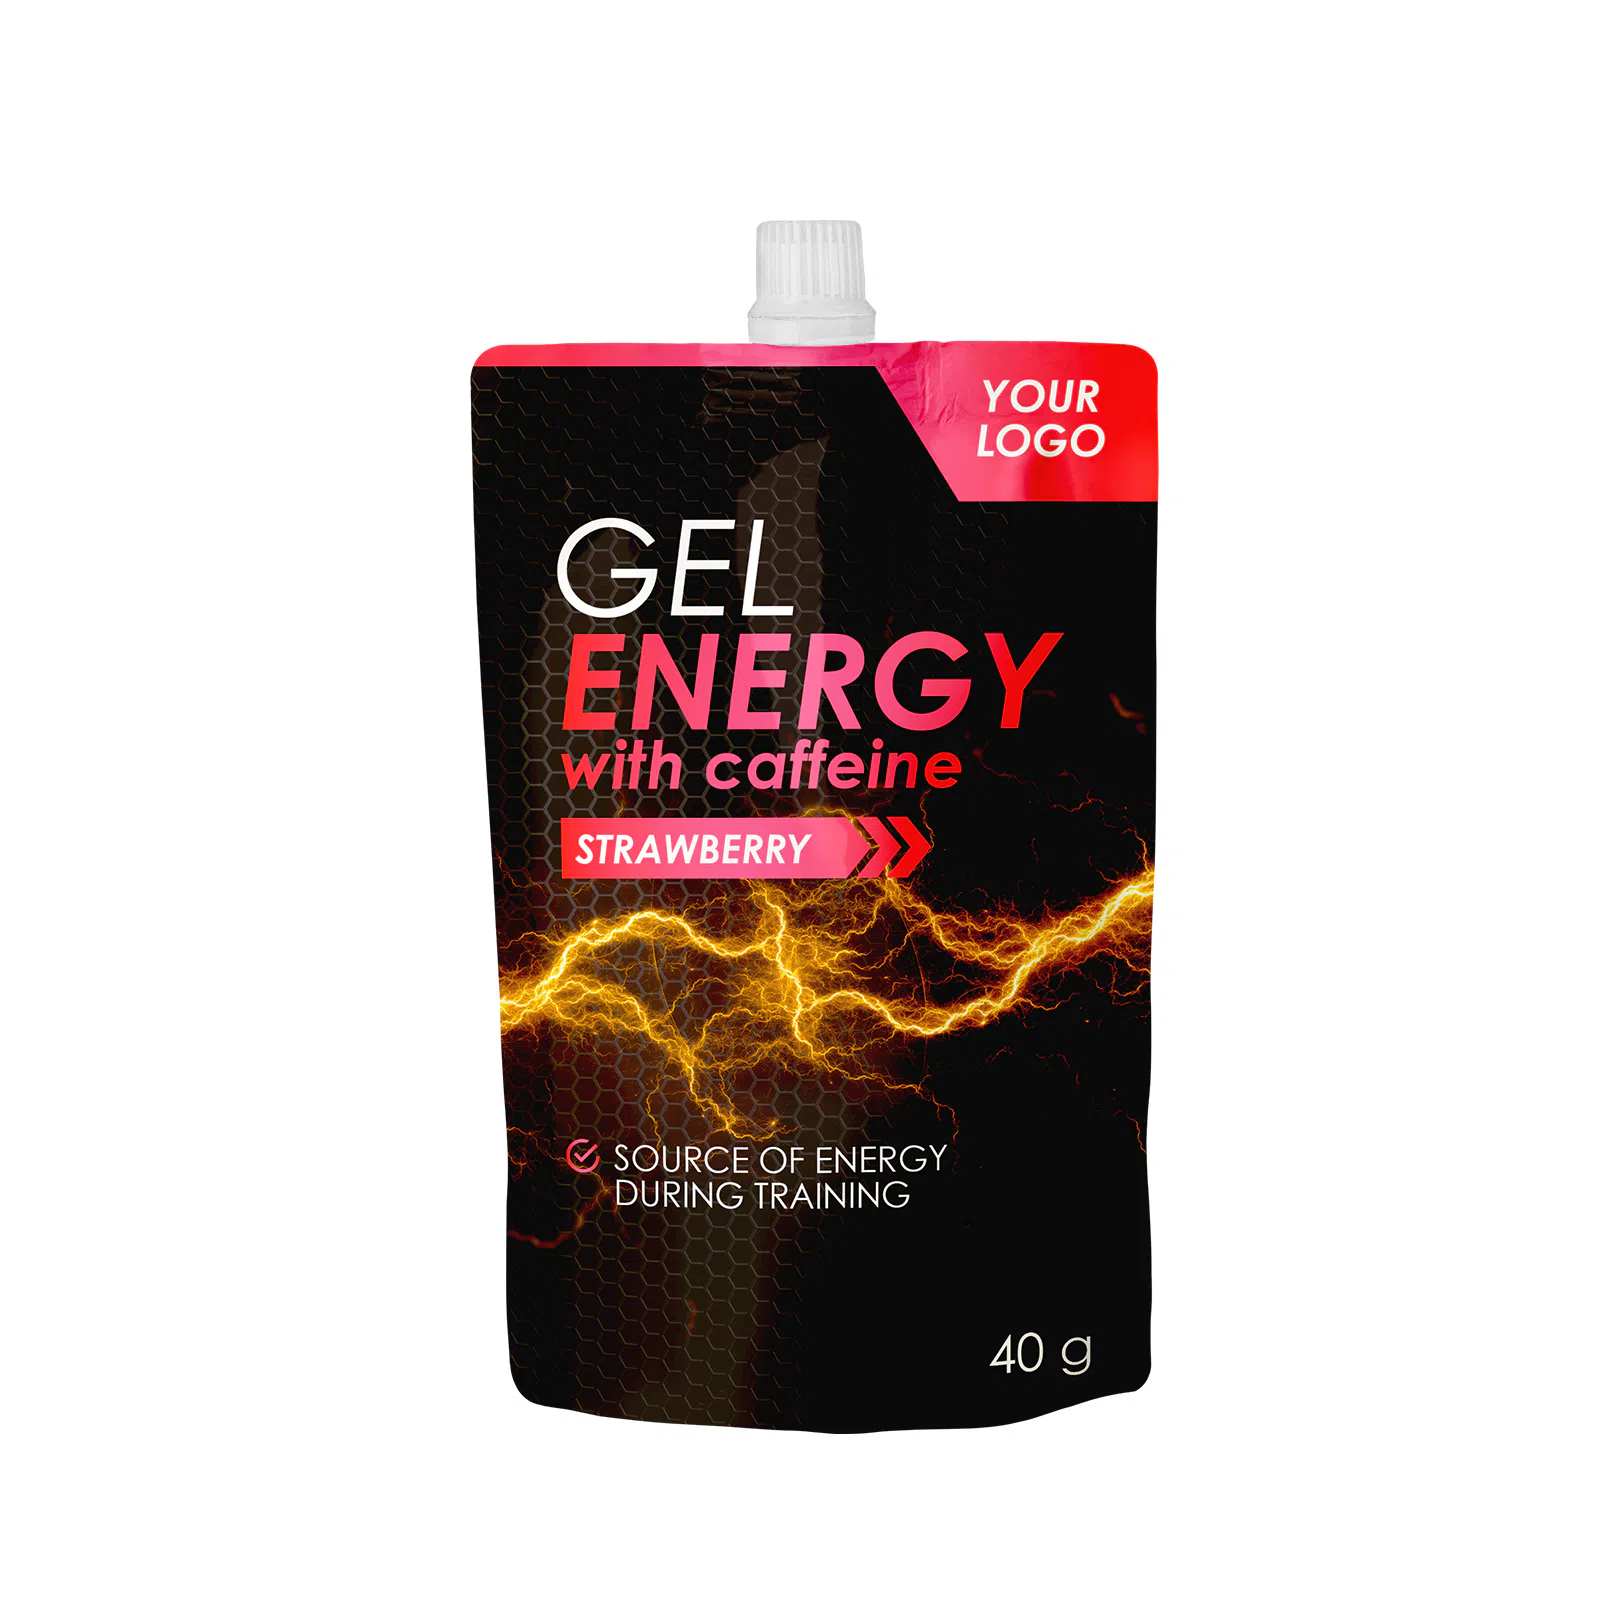 Private label amerpharma energy gel with caffeine in pouch 40 g flavour strawberry